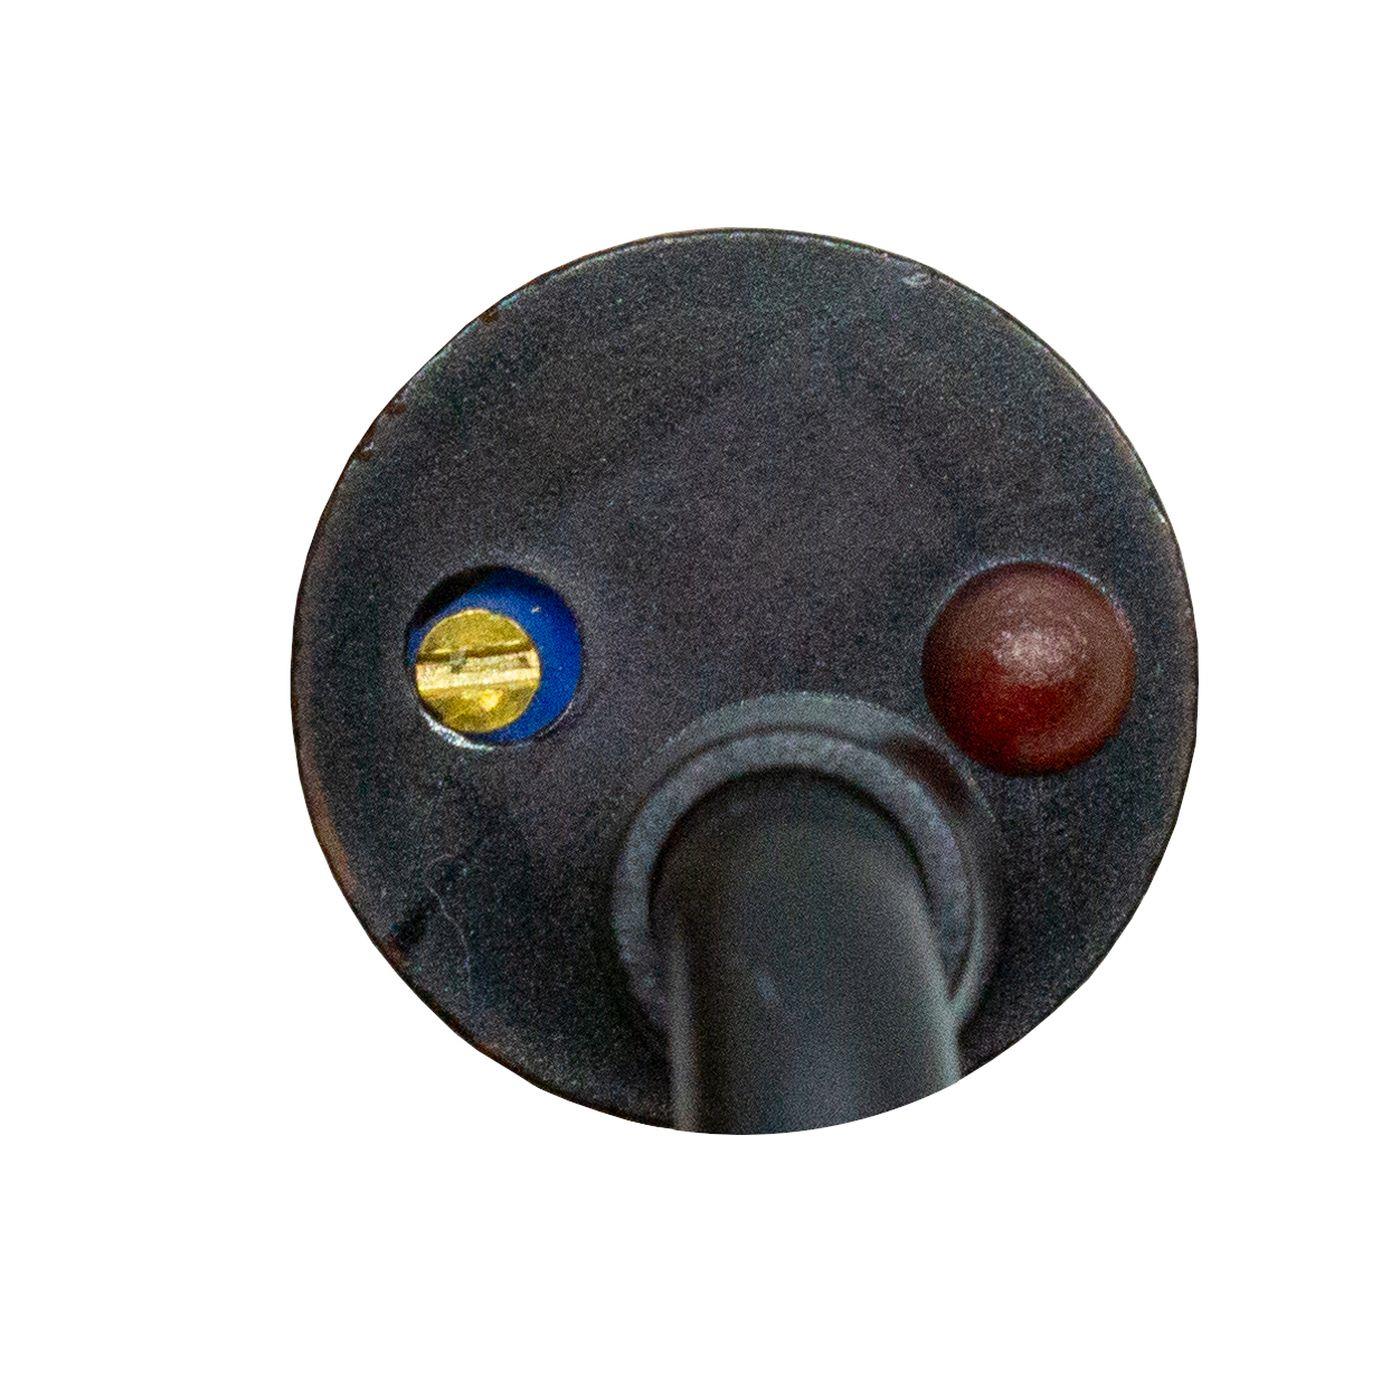 Proximity switch Capacitive 18mm M18 NPN NO contact 6...36V DC IP67 Sensor Brass nickel-plated -30...+65°C